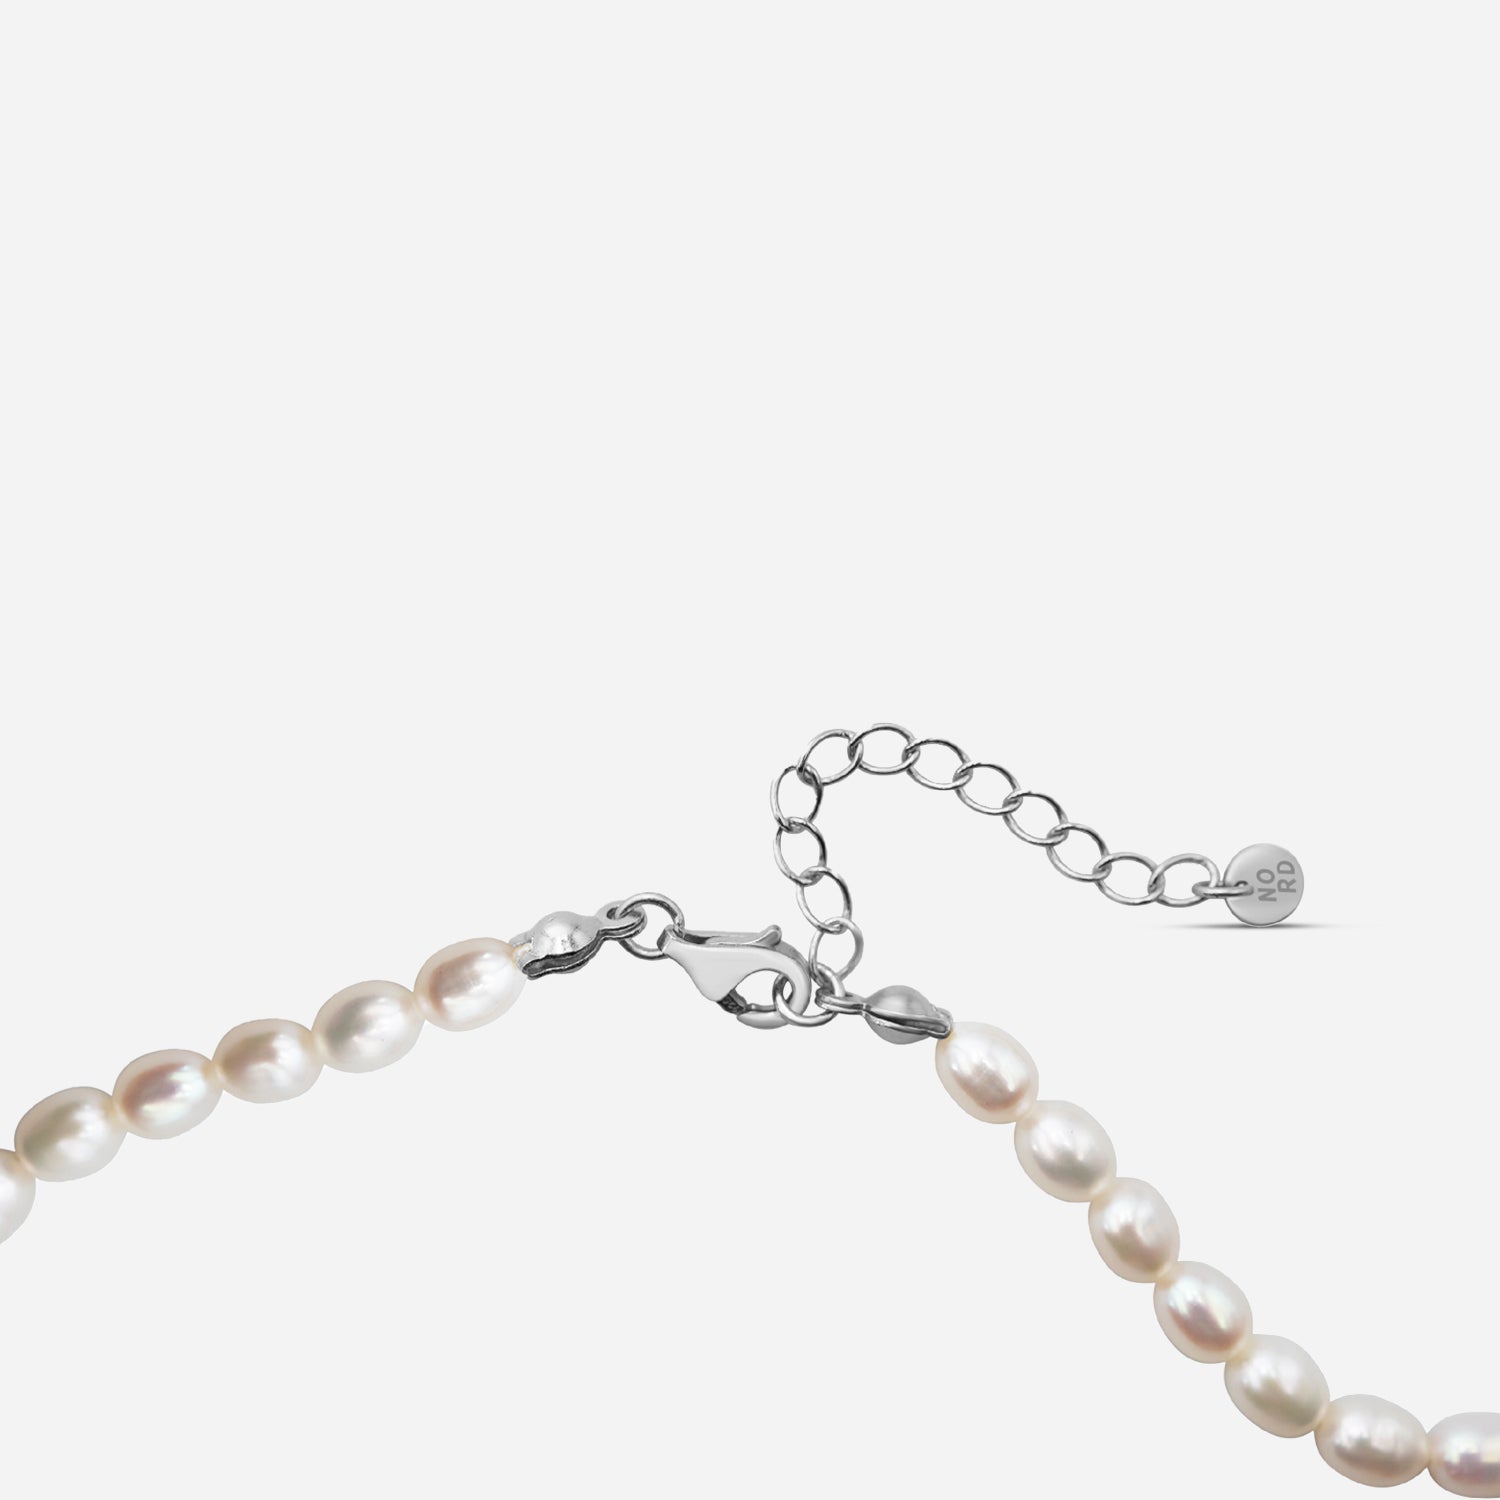 Pearl necklace "Rosa" - Silver